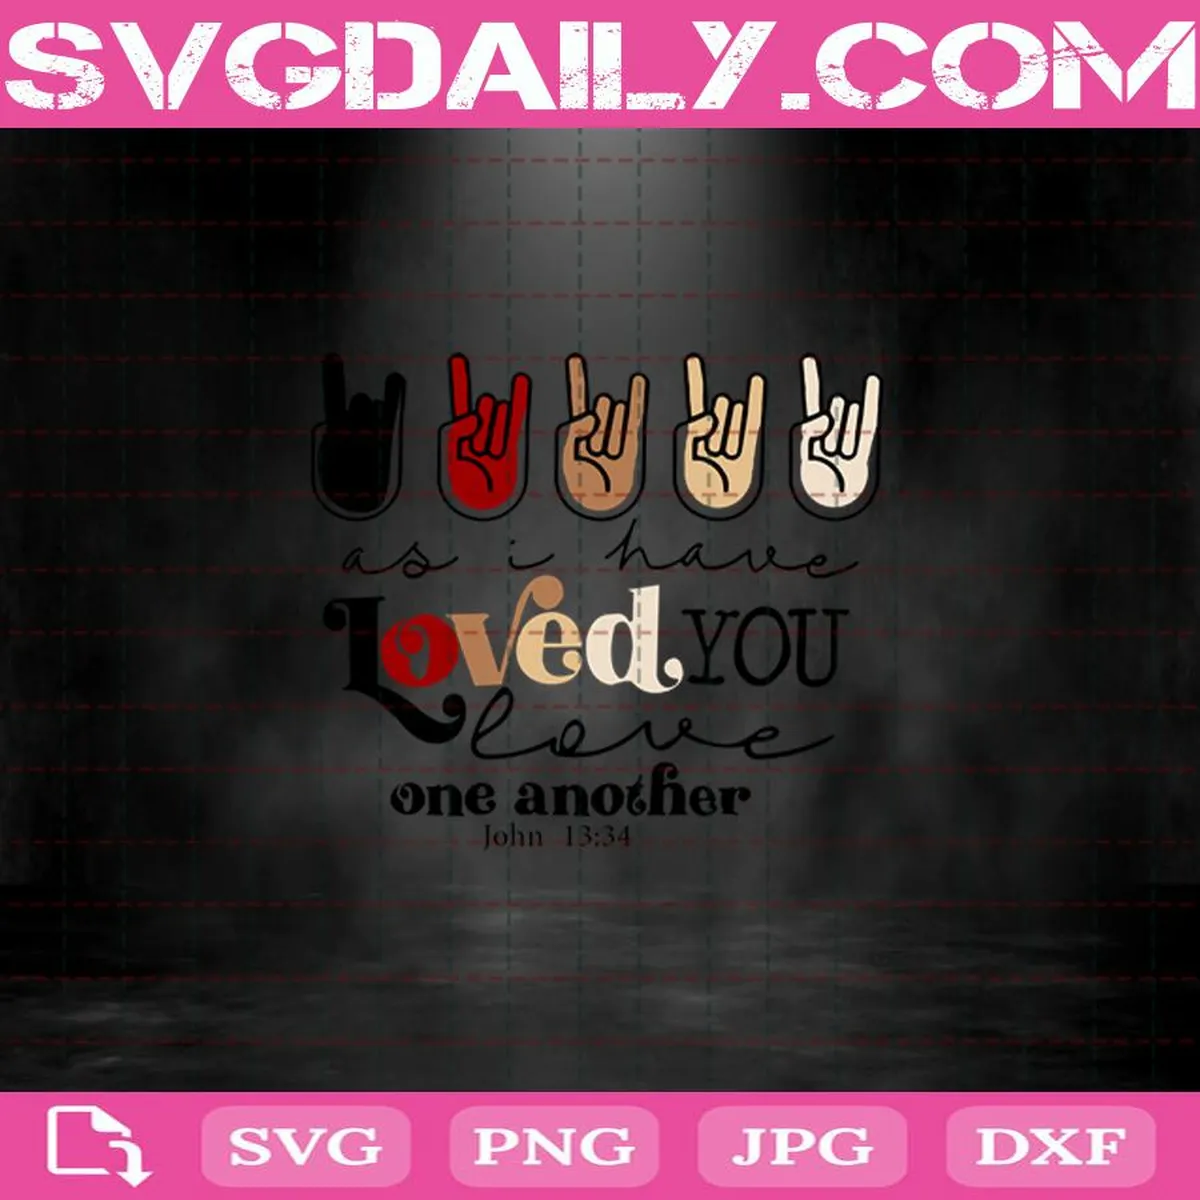 John 1334 Svg, Love One Another Svg, As I Have Loved You Svg, Loved You Svg Dxf Png Eps Cutting Cut File Silhouette Cricut